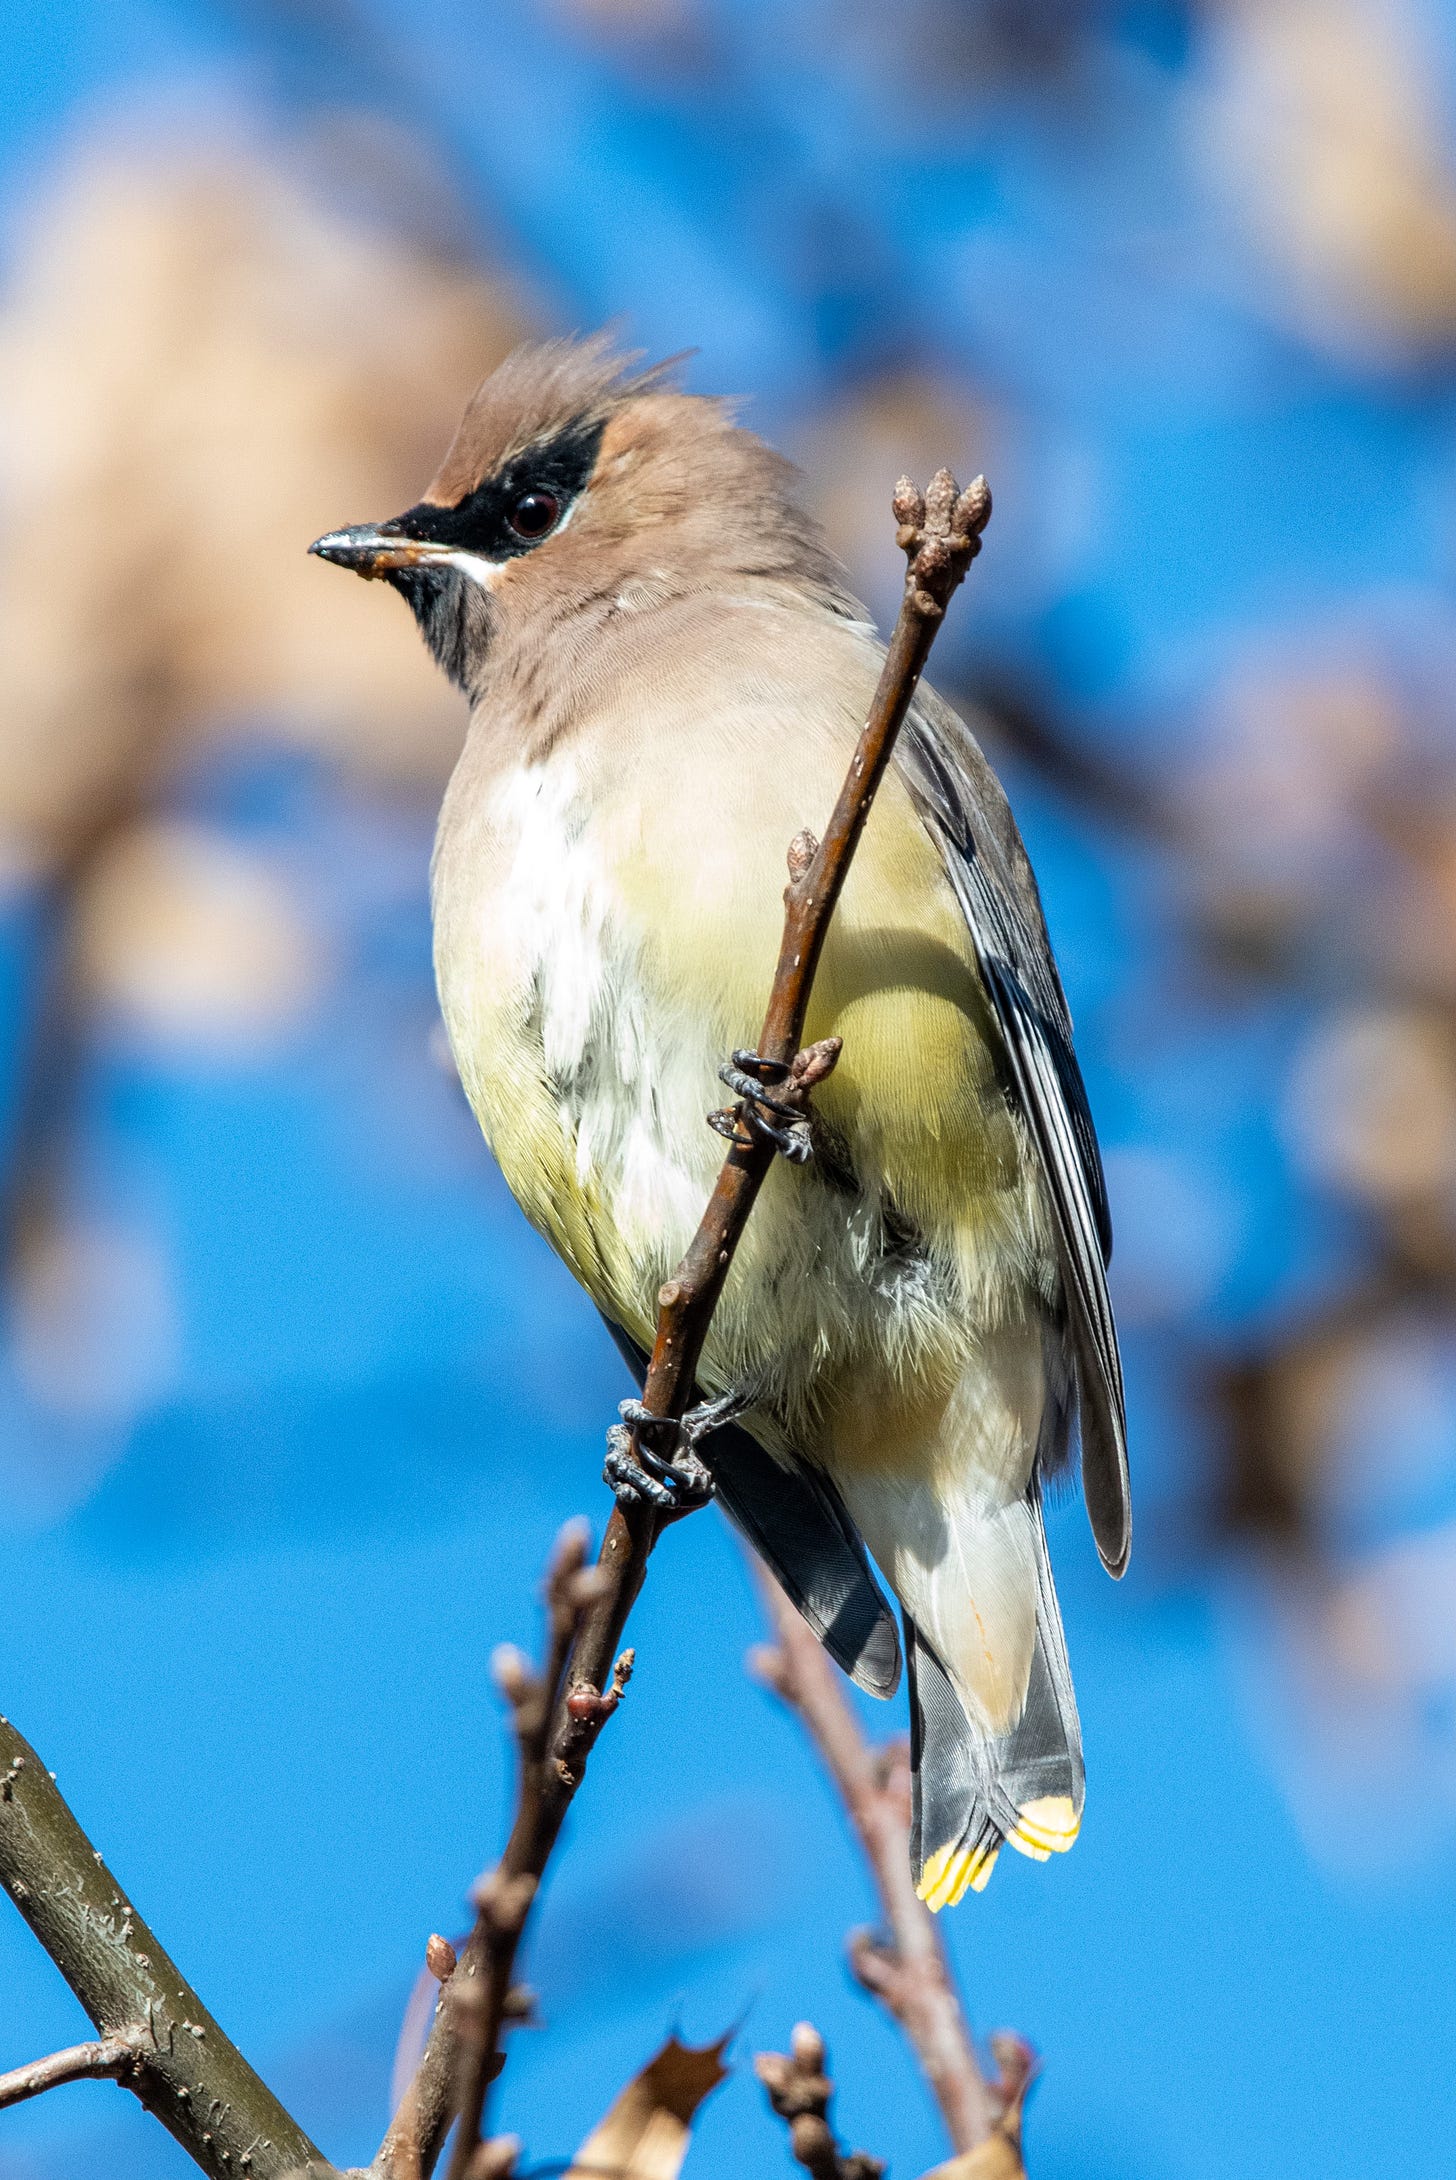 A cedar waxwing, with a black eyestripe that evokes Starman-era David Bowie or Daryl Hannah in Blade Runner, is perched on a bare branch